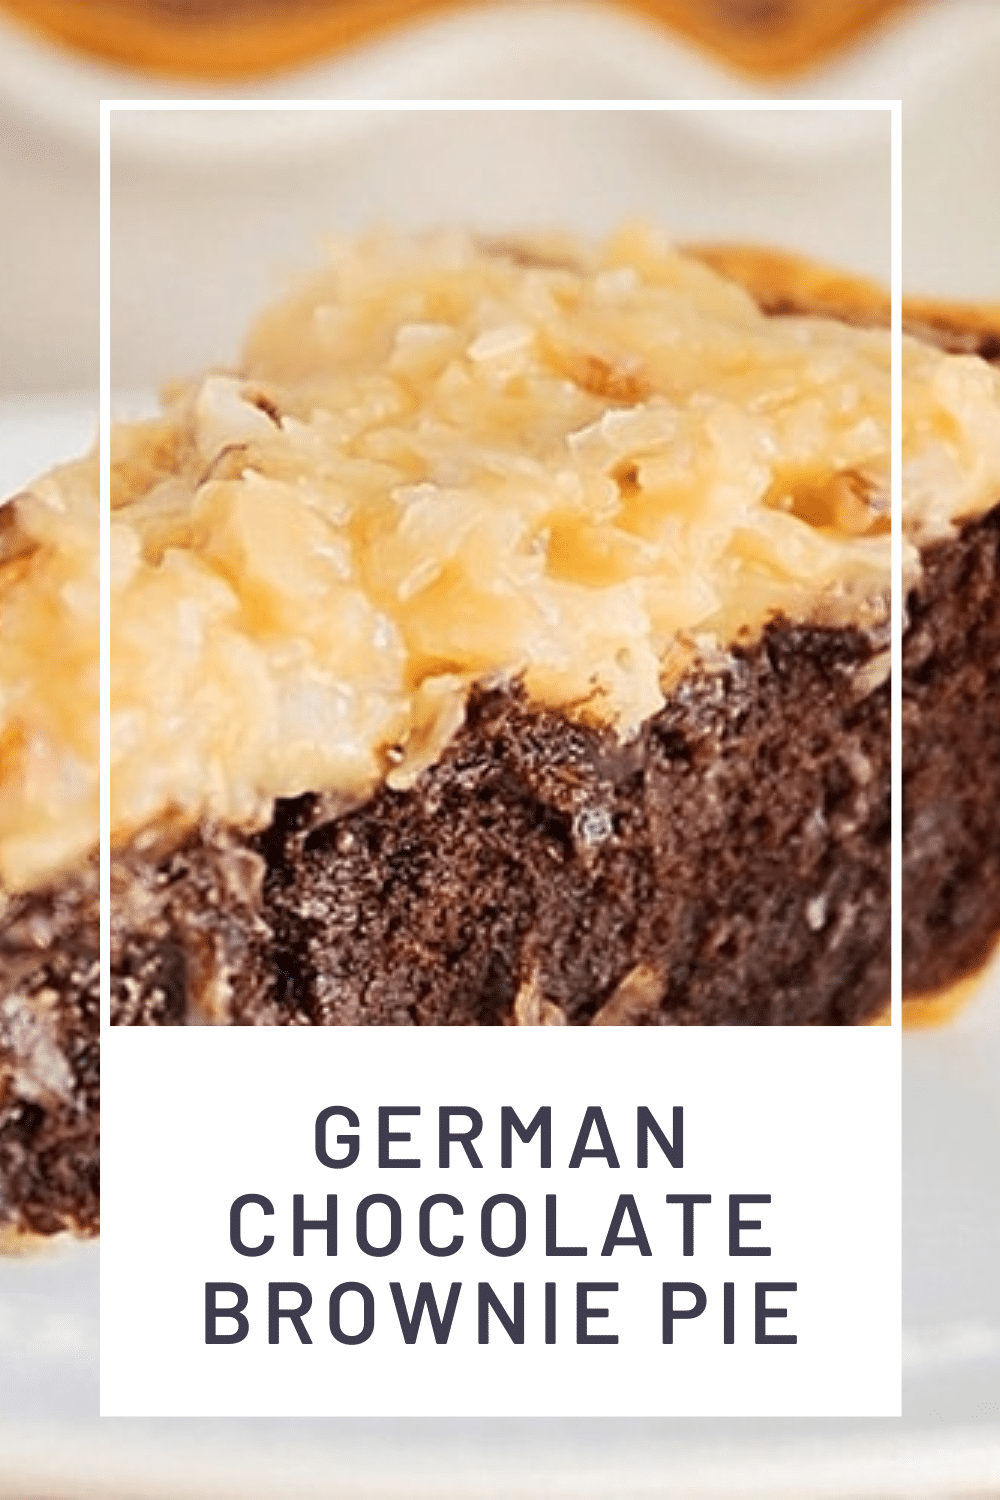 This German chocolate brownie pie is a decadent dessert you're sure to love. With all of the flavors of your favorite cake, but in brownie form, it's will soon be your favorite dessert! via @somewhatsimple